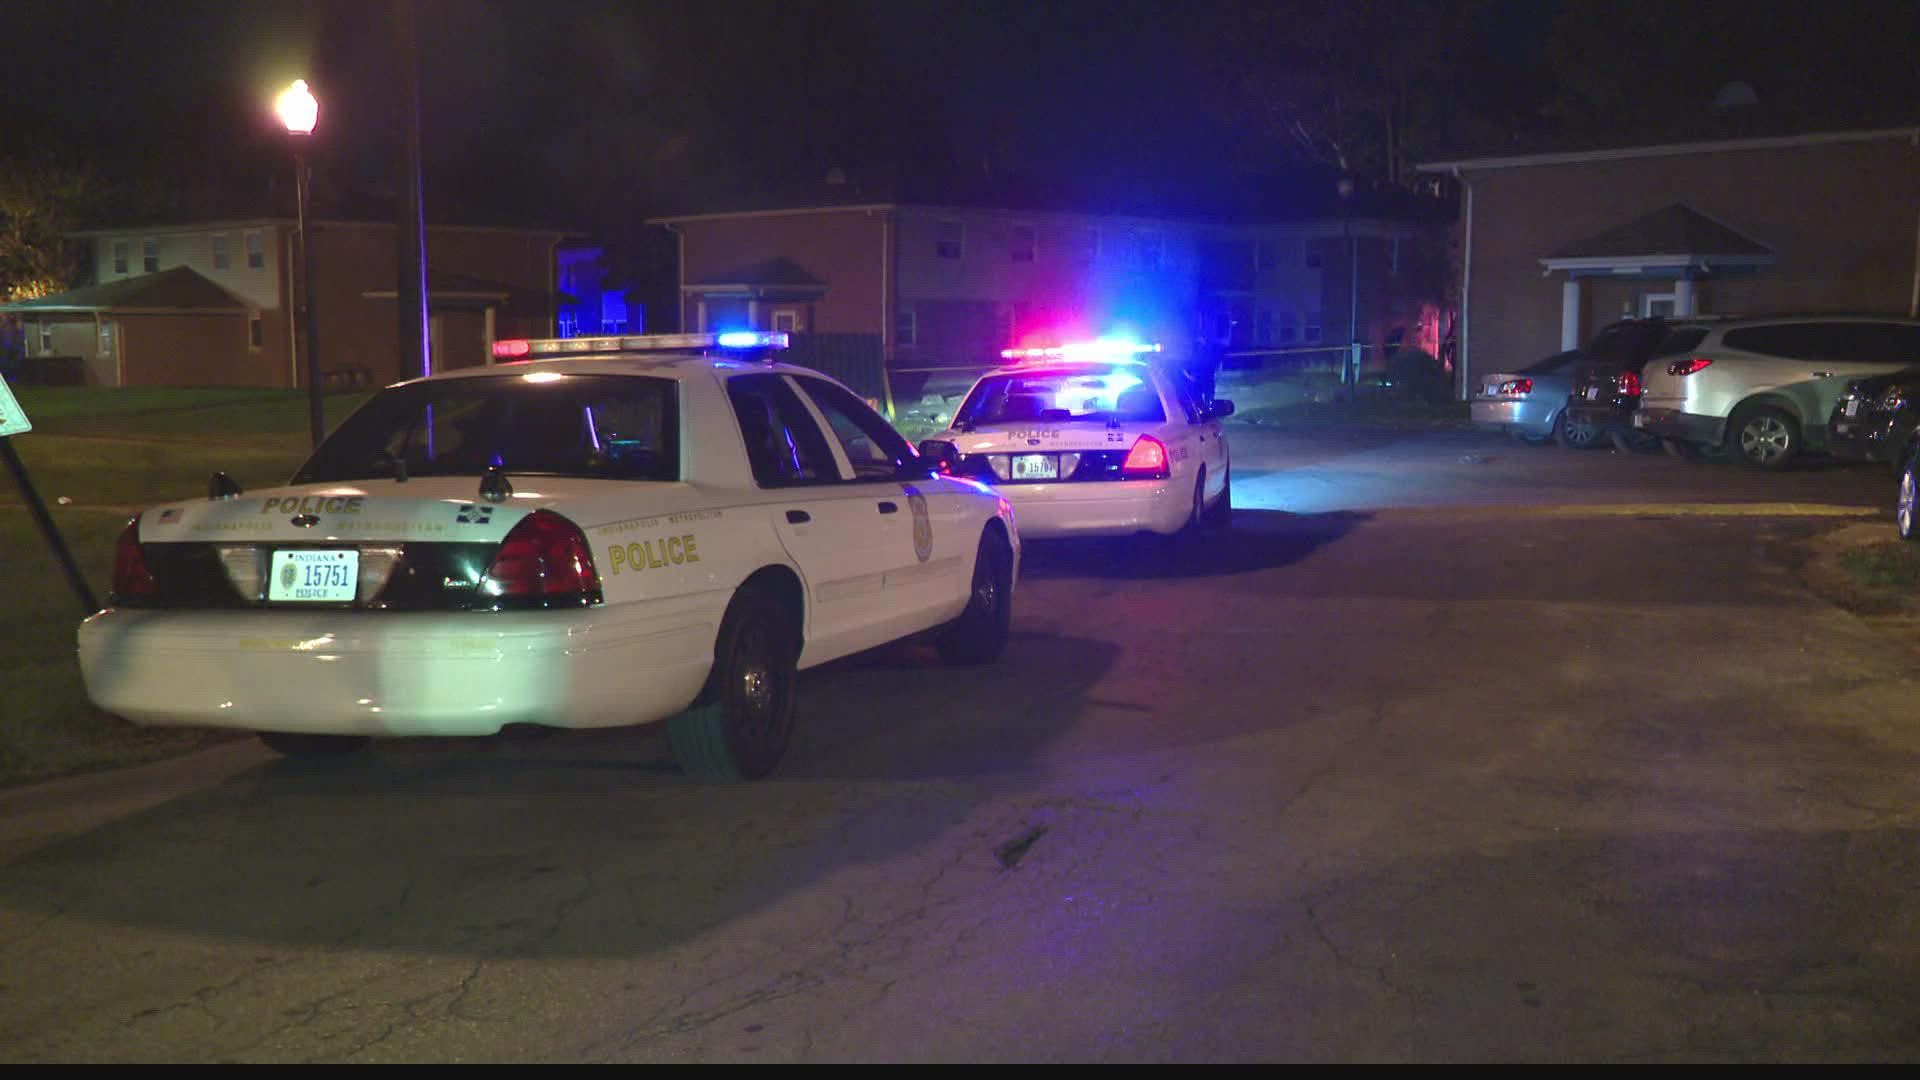 Officers were called to the 5200 block of Butler Terrace around 1 a.m. Monday on a report of a person shot.